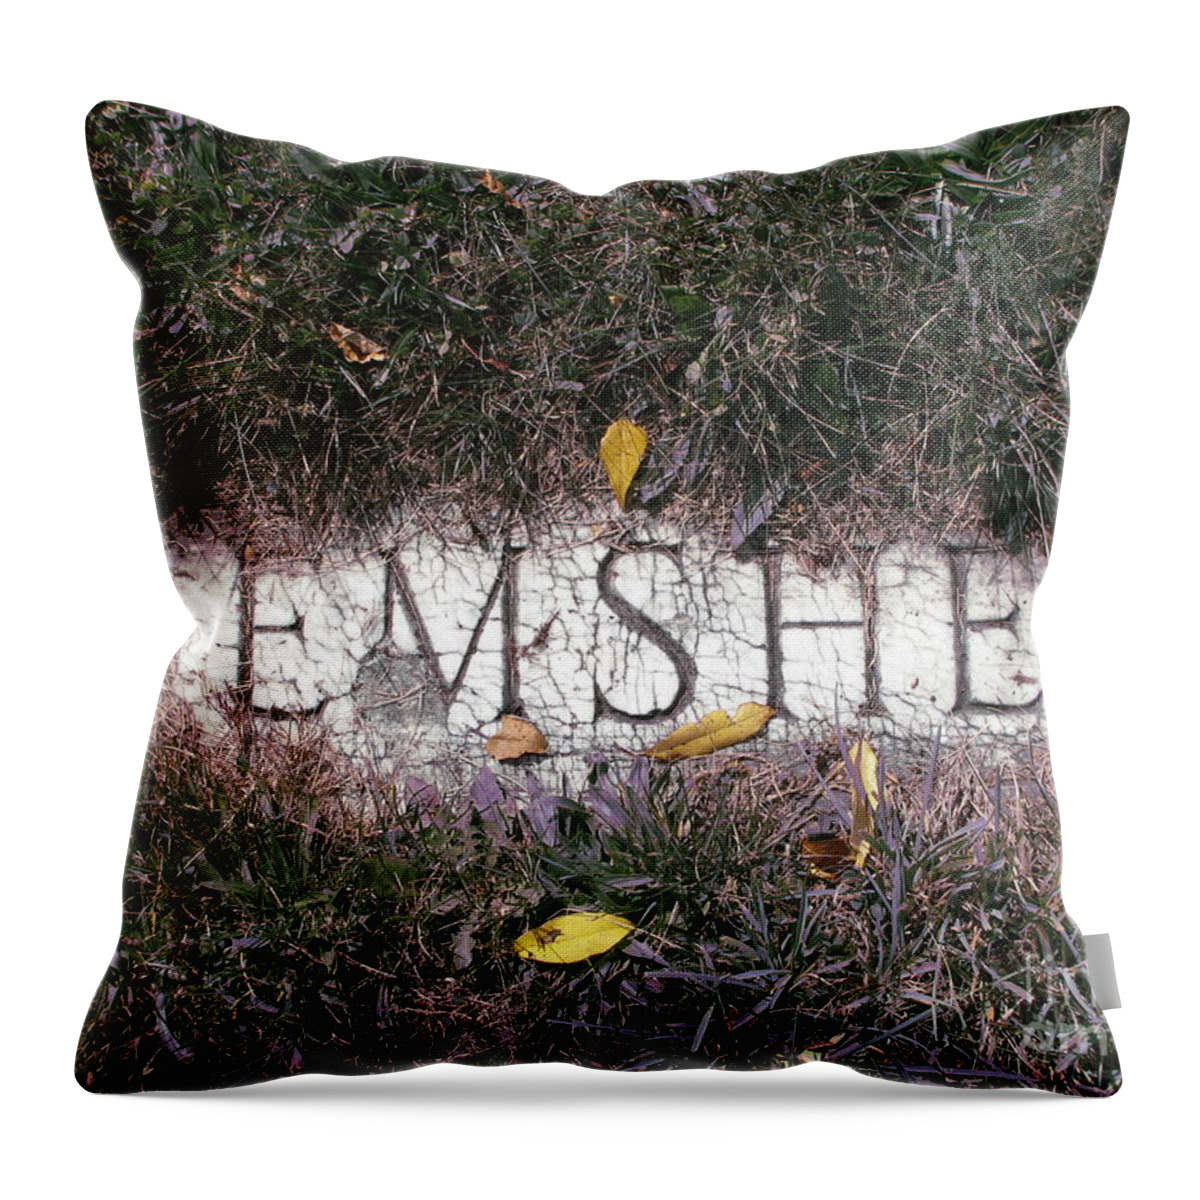 Tombstone Throw Pillow featuring the photograph Family Crest by Michael Krek